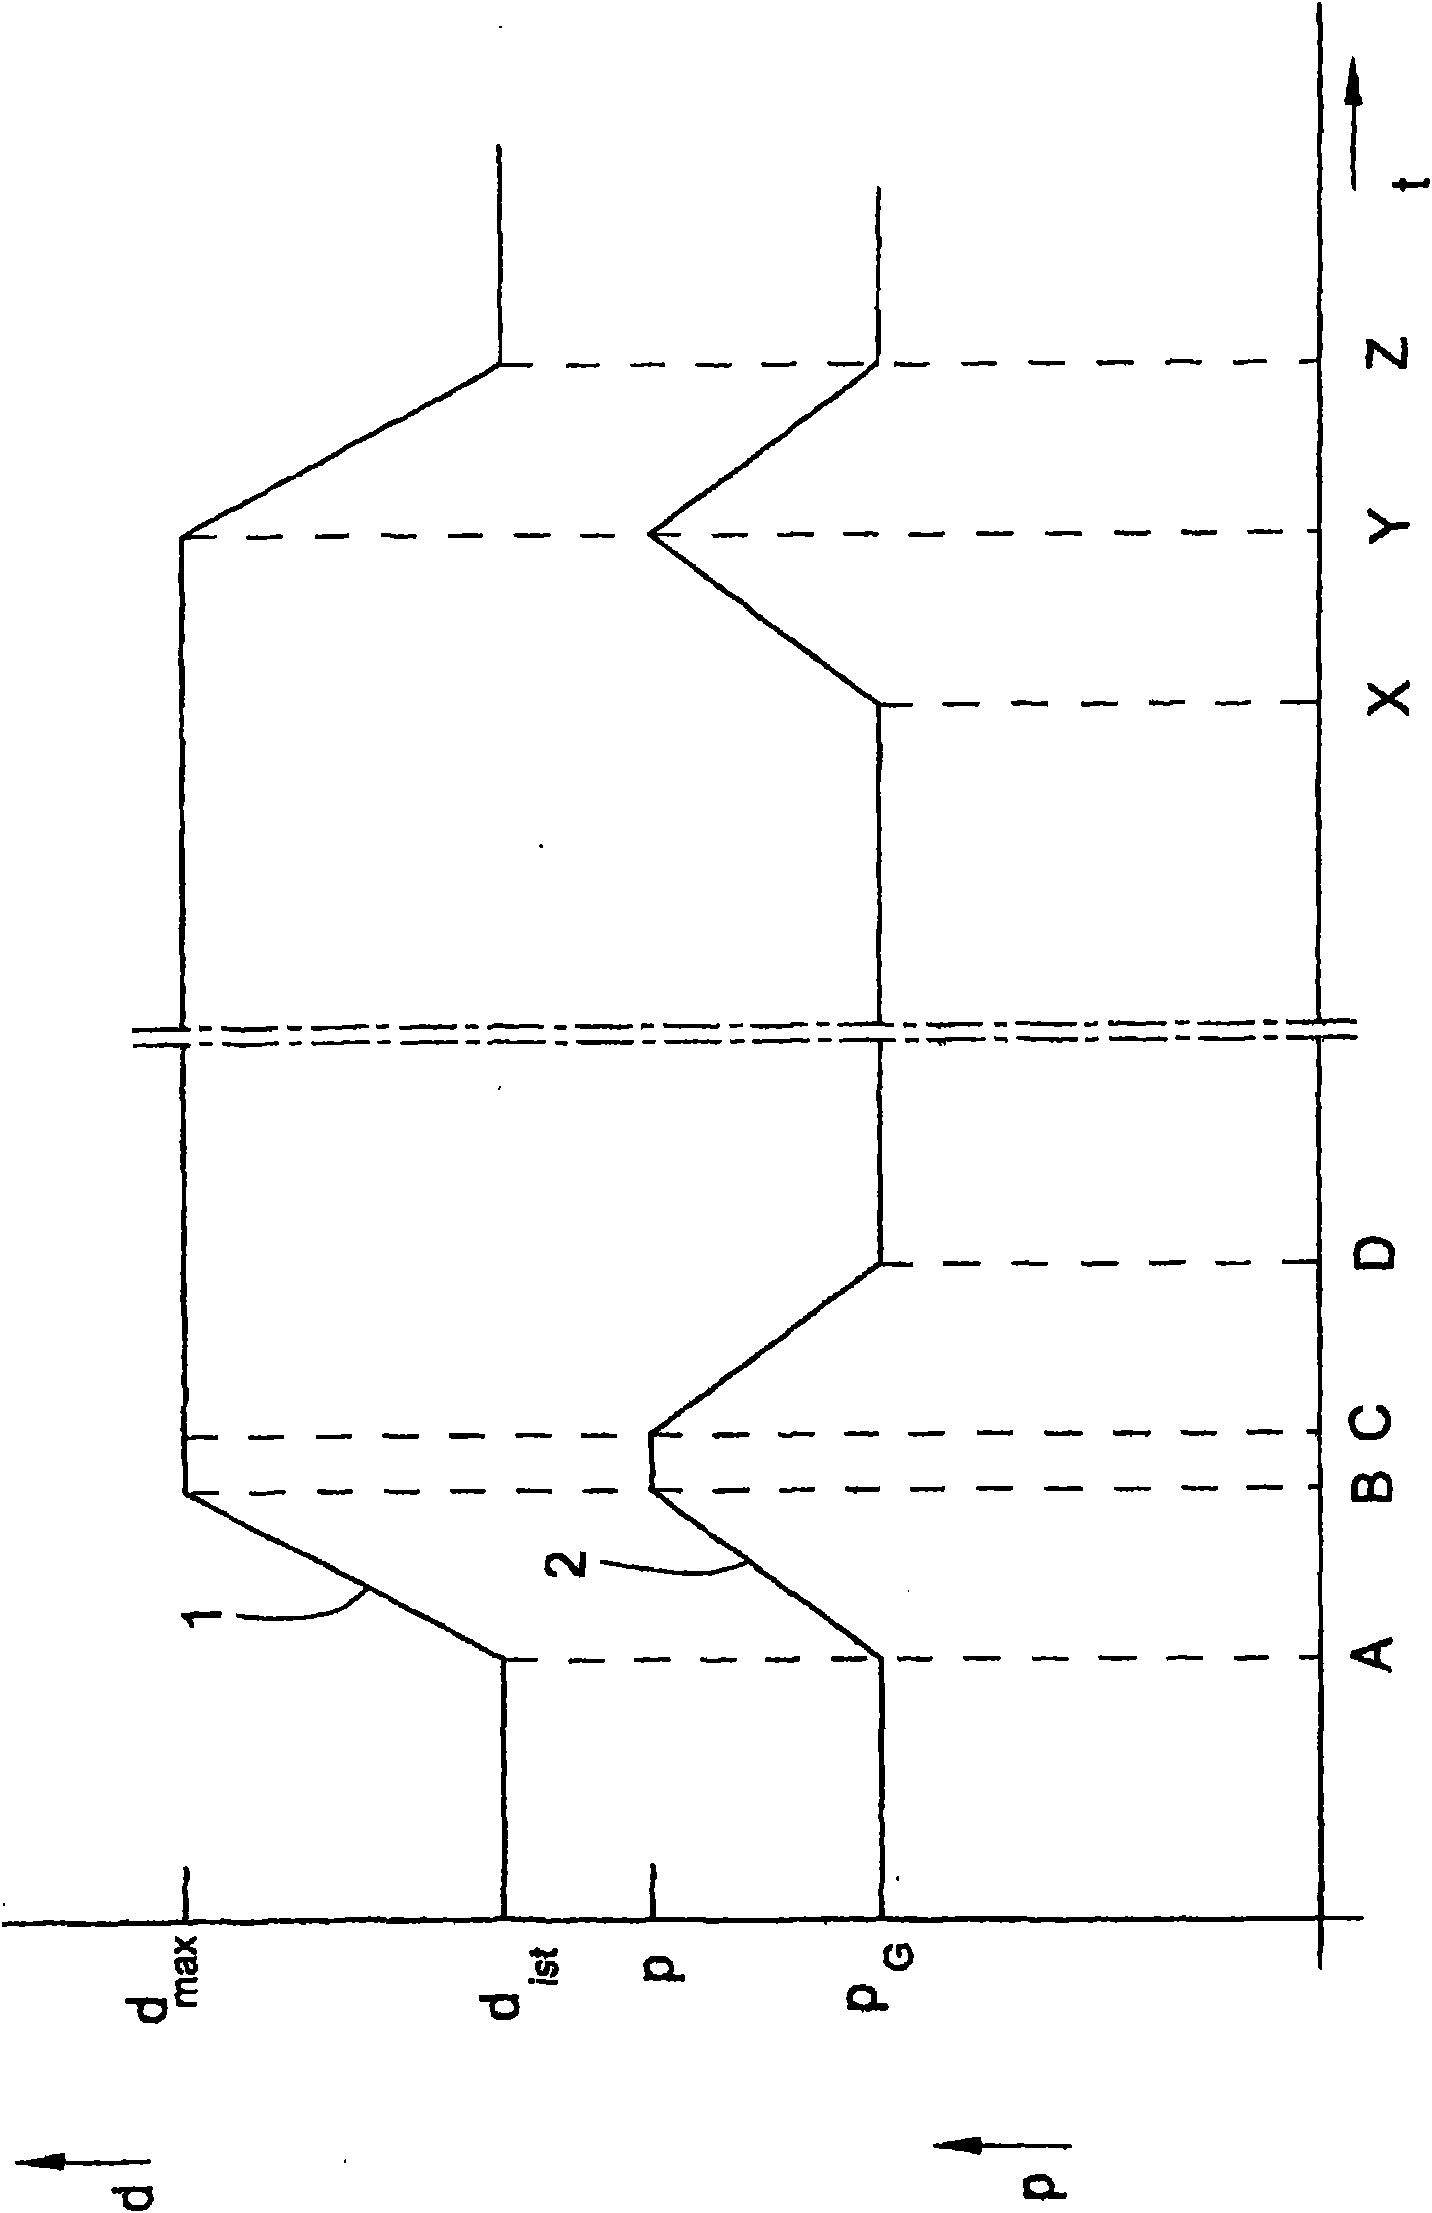 Method for operating a textile machine which is provided with a vacuum device and produces crosswound bobbins